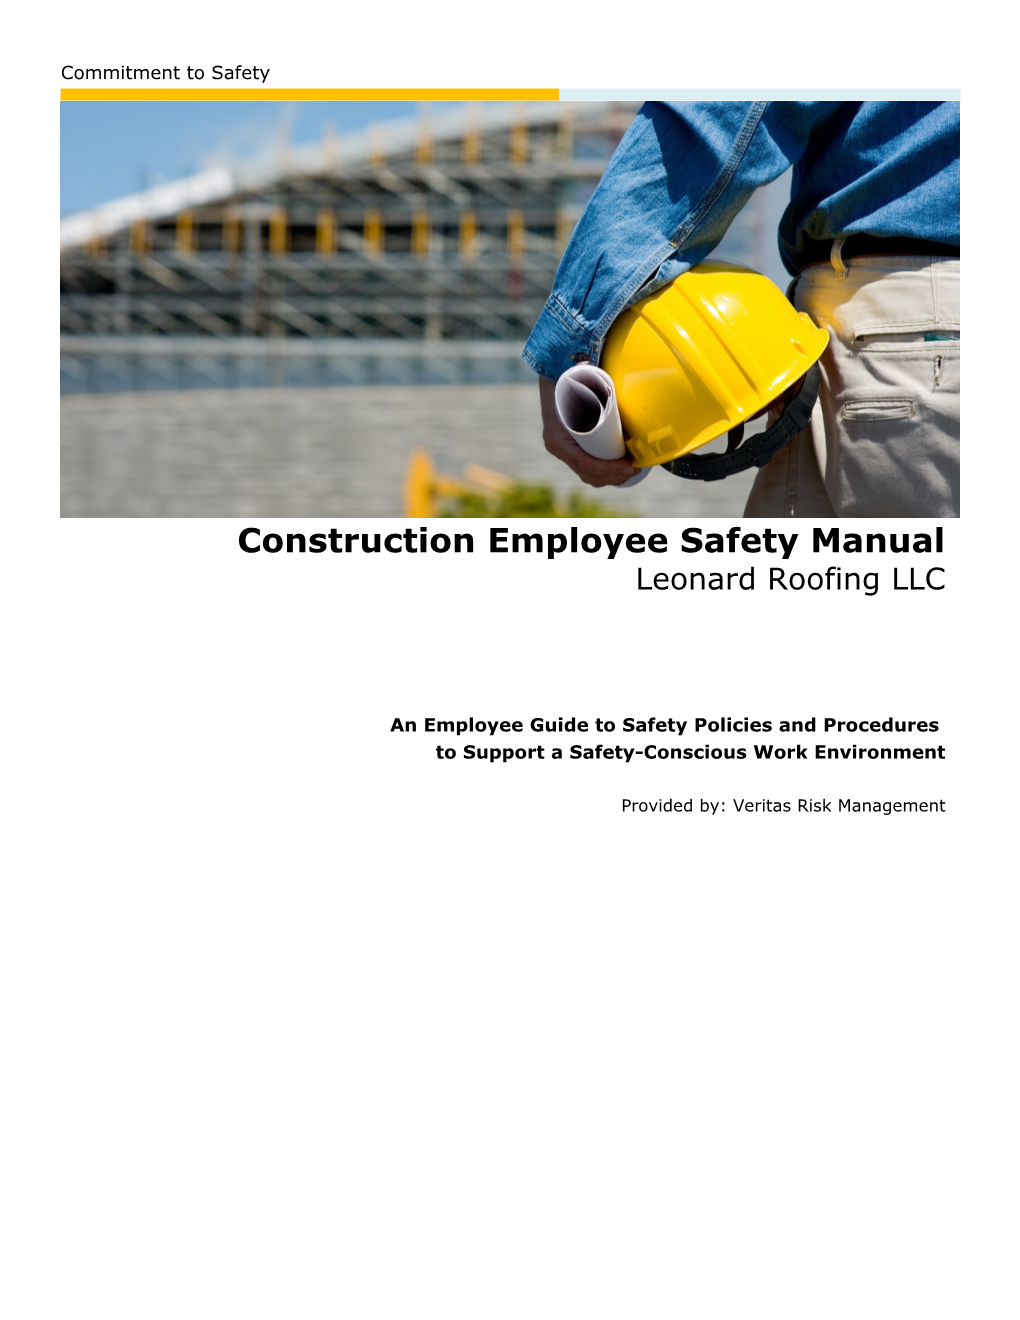 Construction Employee Safety Manual